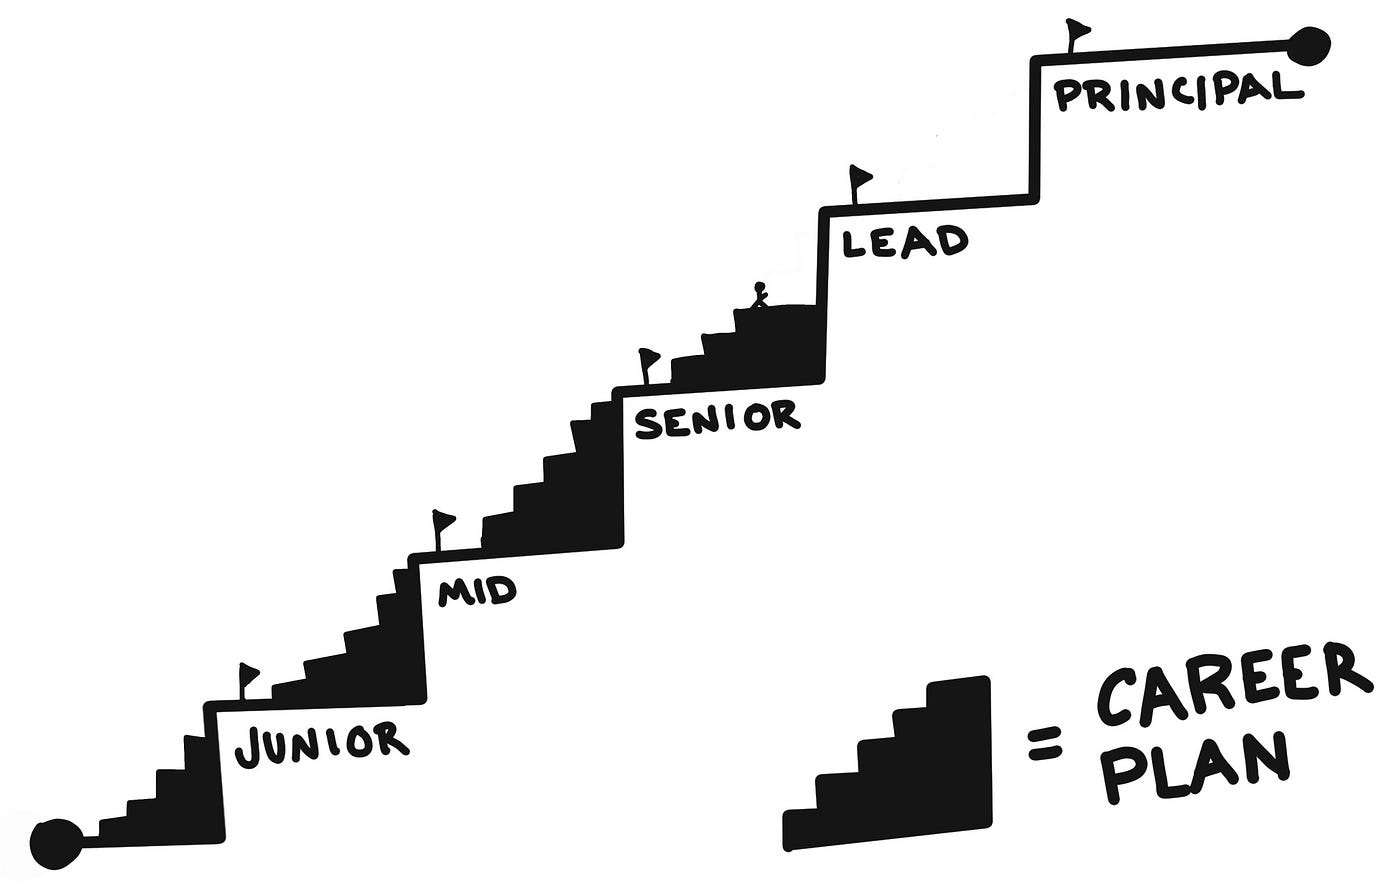 Illustration of a career plan and how it related to the career ladder